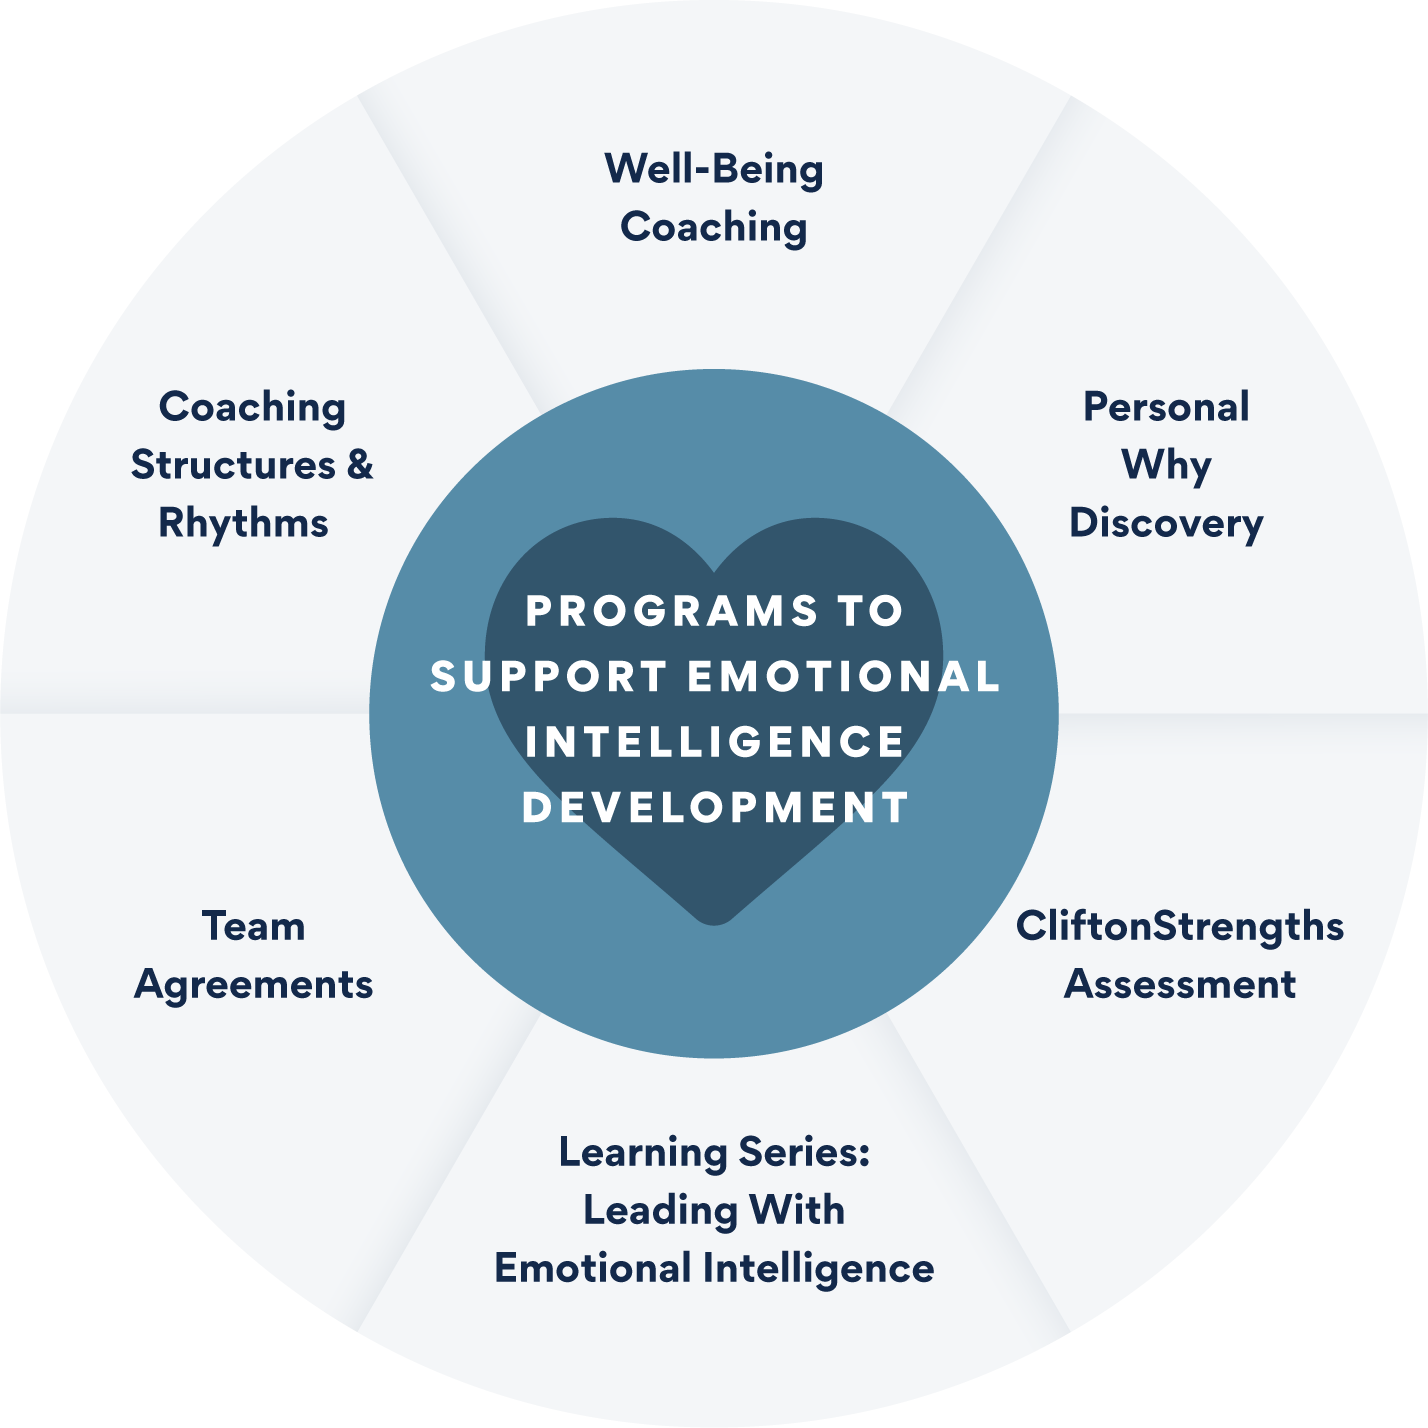 infographic detailing the existing programs at torrent consulting to support emotional intelligence development at work such as well-being coaching, personal why discovery, learning series, cliftonStrengths assessment, team agreements, coaching structures and rhythms